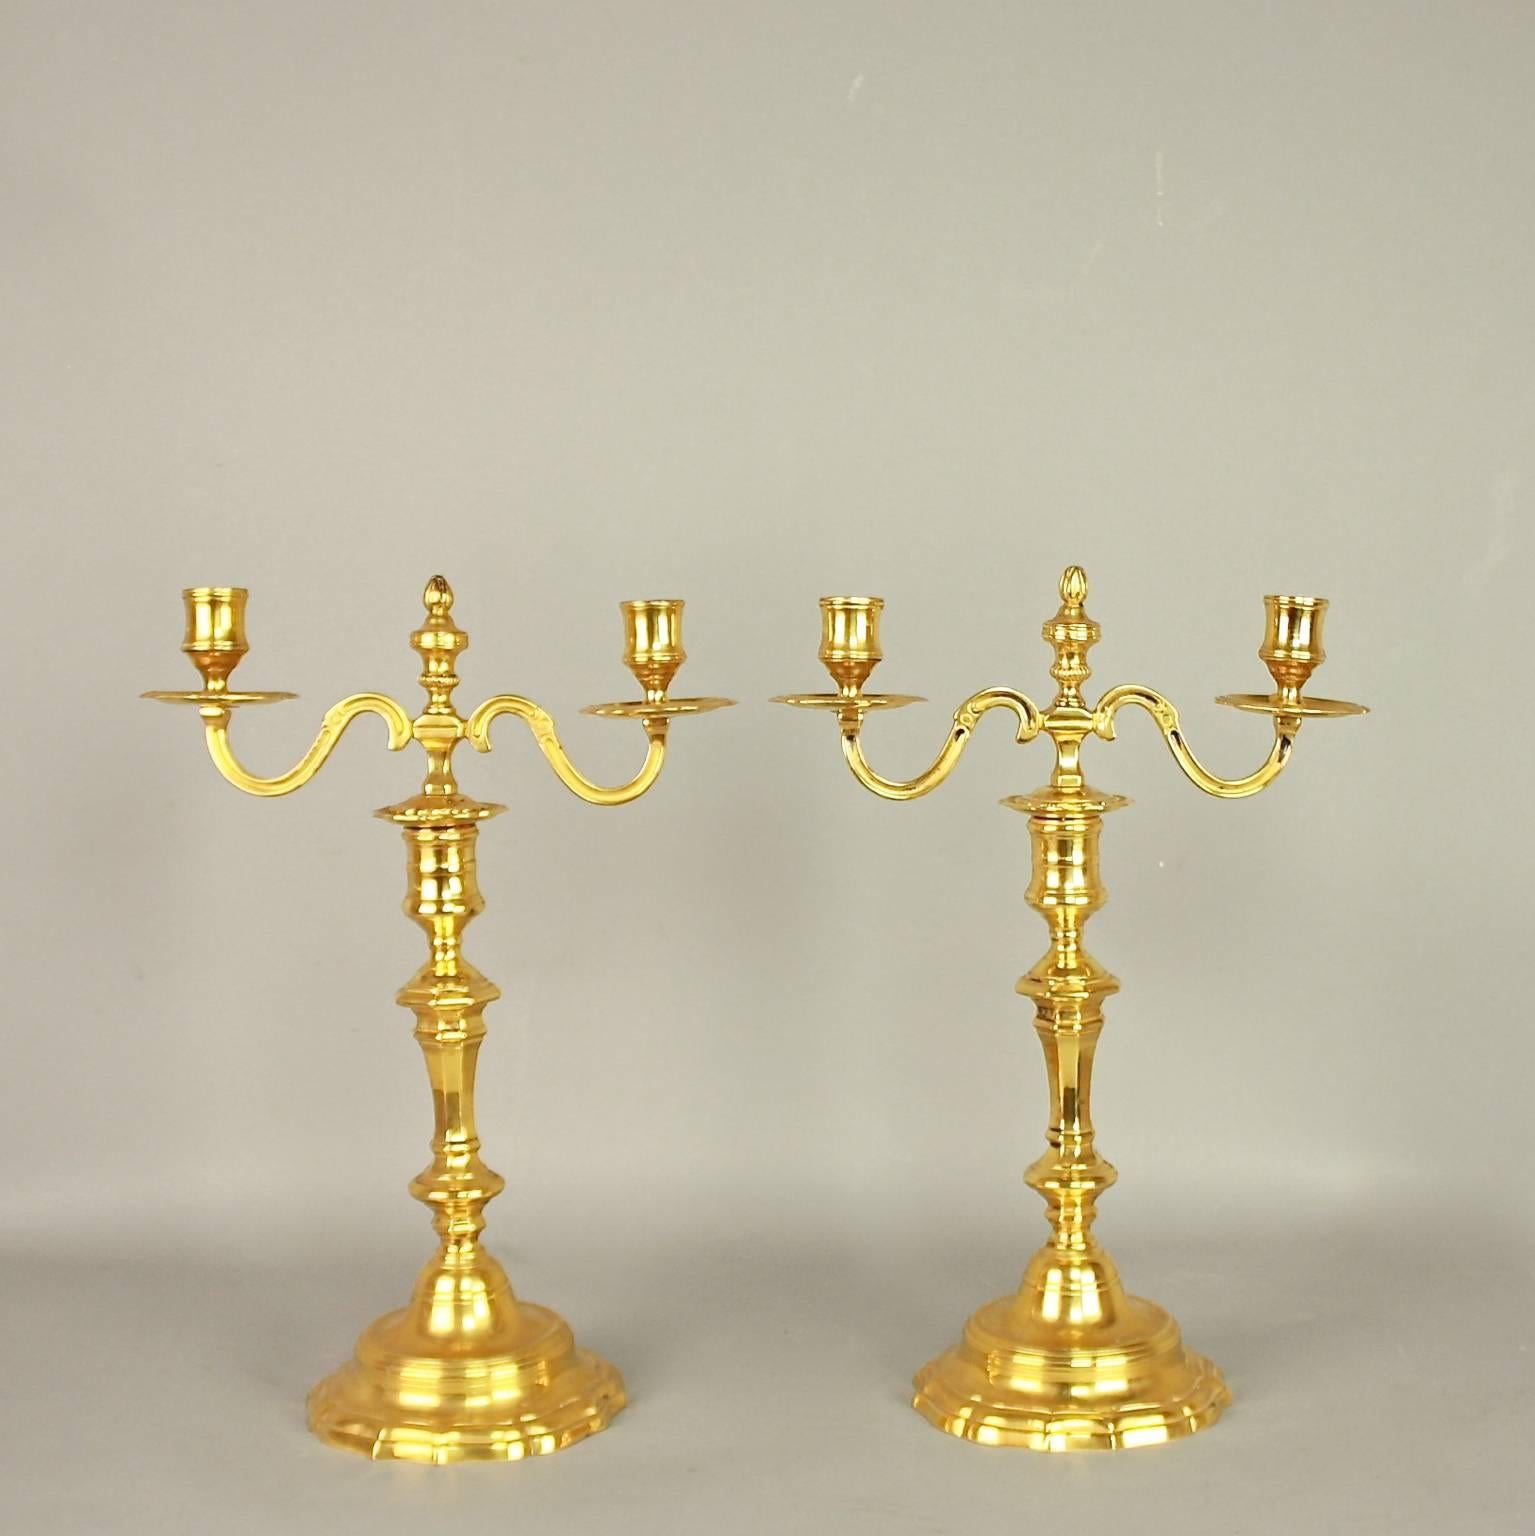 A fine pair of Louis XV ormolu two-light candelabra on a shaped circular base with a tapering octagonal stem and a baluster finial, issuing two scrolled arms supporting cylindrical sockets. The top part consisting of candle arms and finial removable